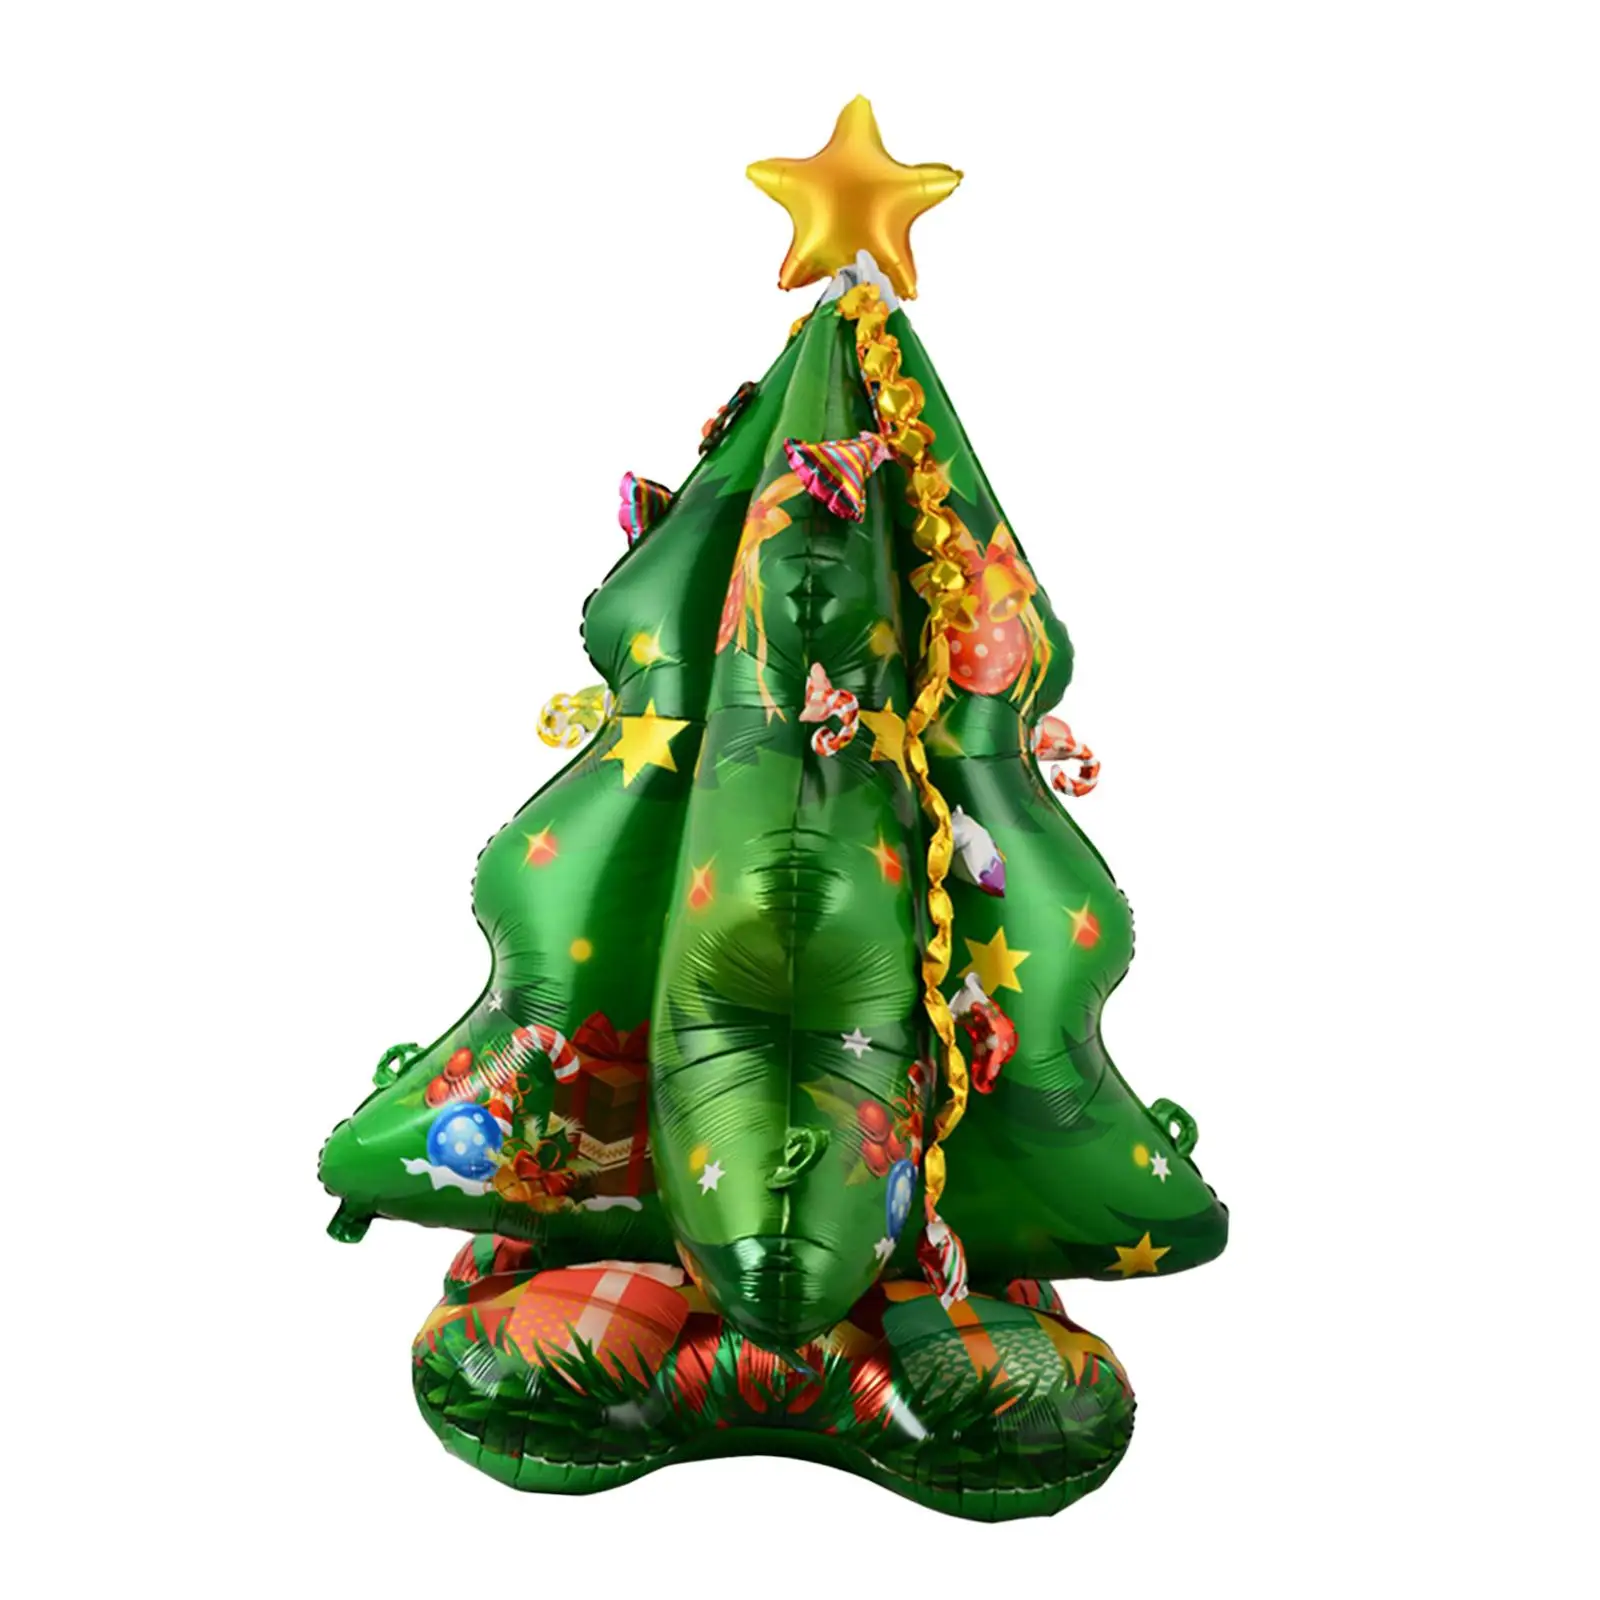 Large Christmas Balloon Kids Adults Decorative Novelty Toy Standing Balloon for Birthday Party Supplies Halloween Festival